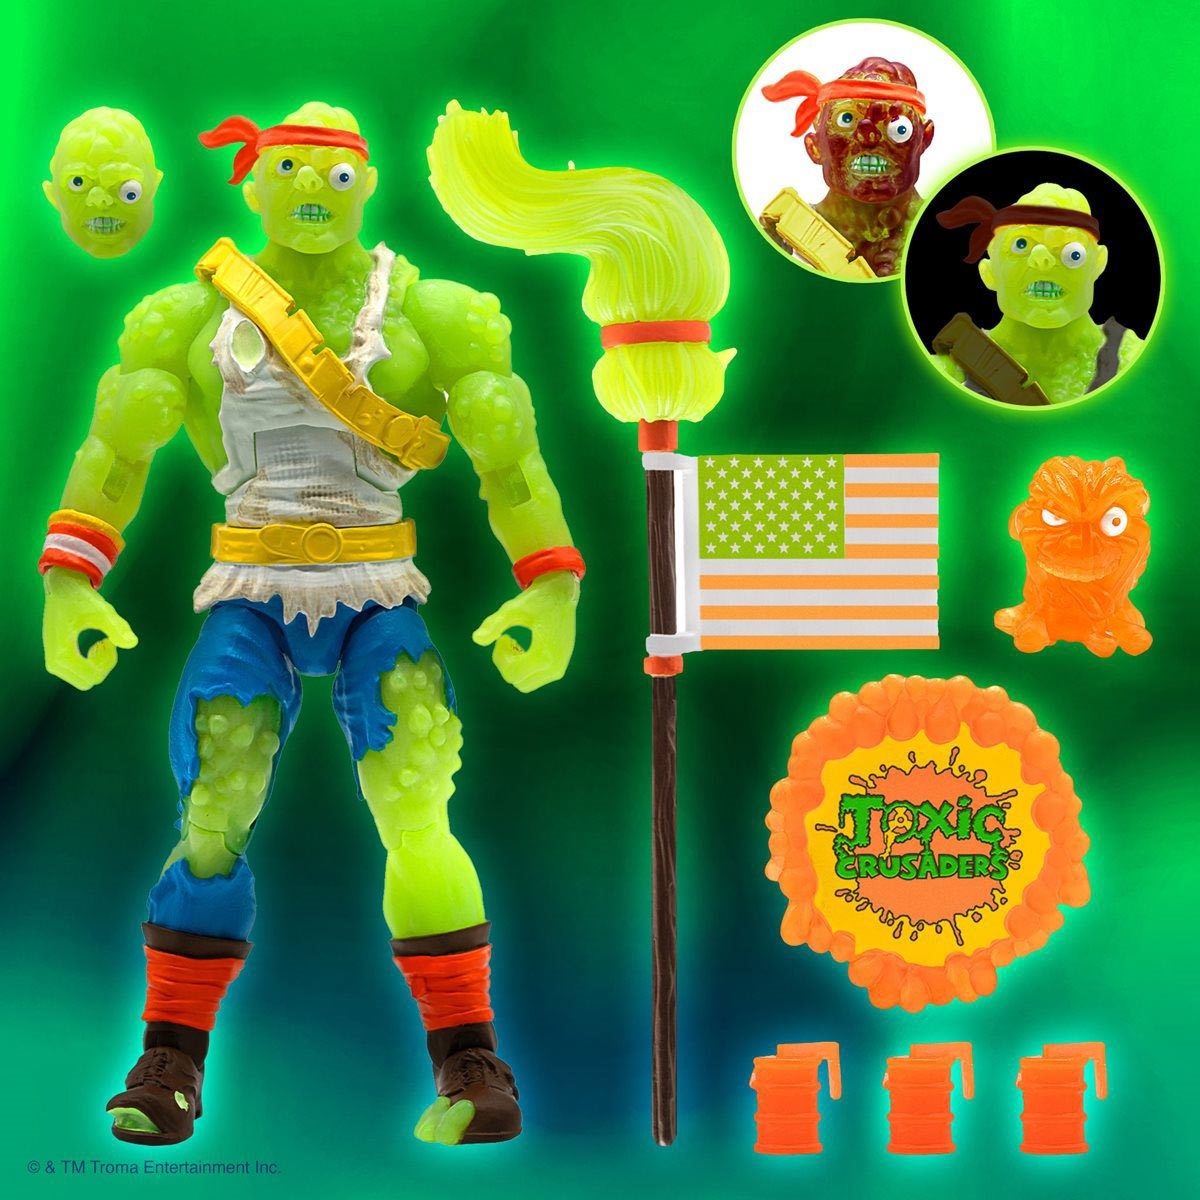 Super 7 Toxic Crusader Radioactive Red Rage 7-Inch Action Figure